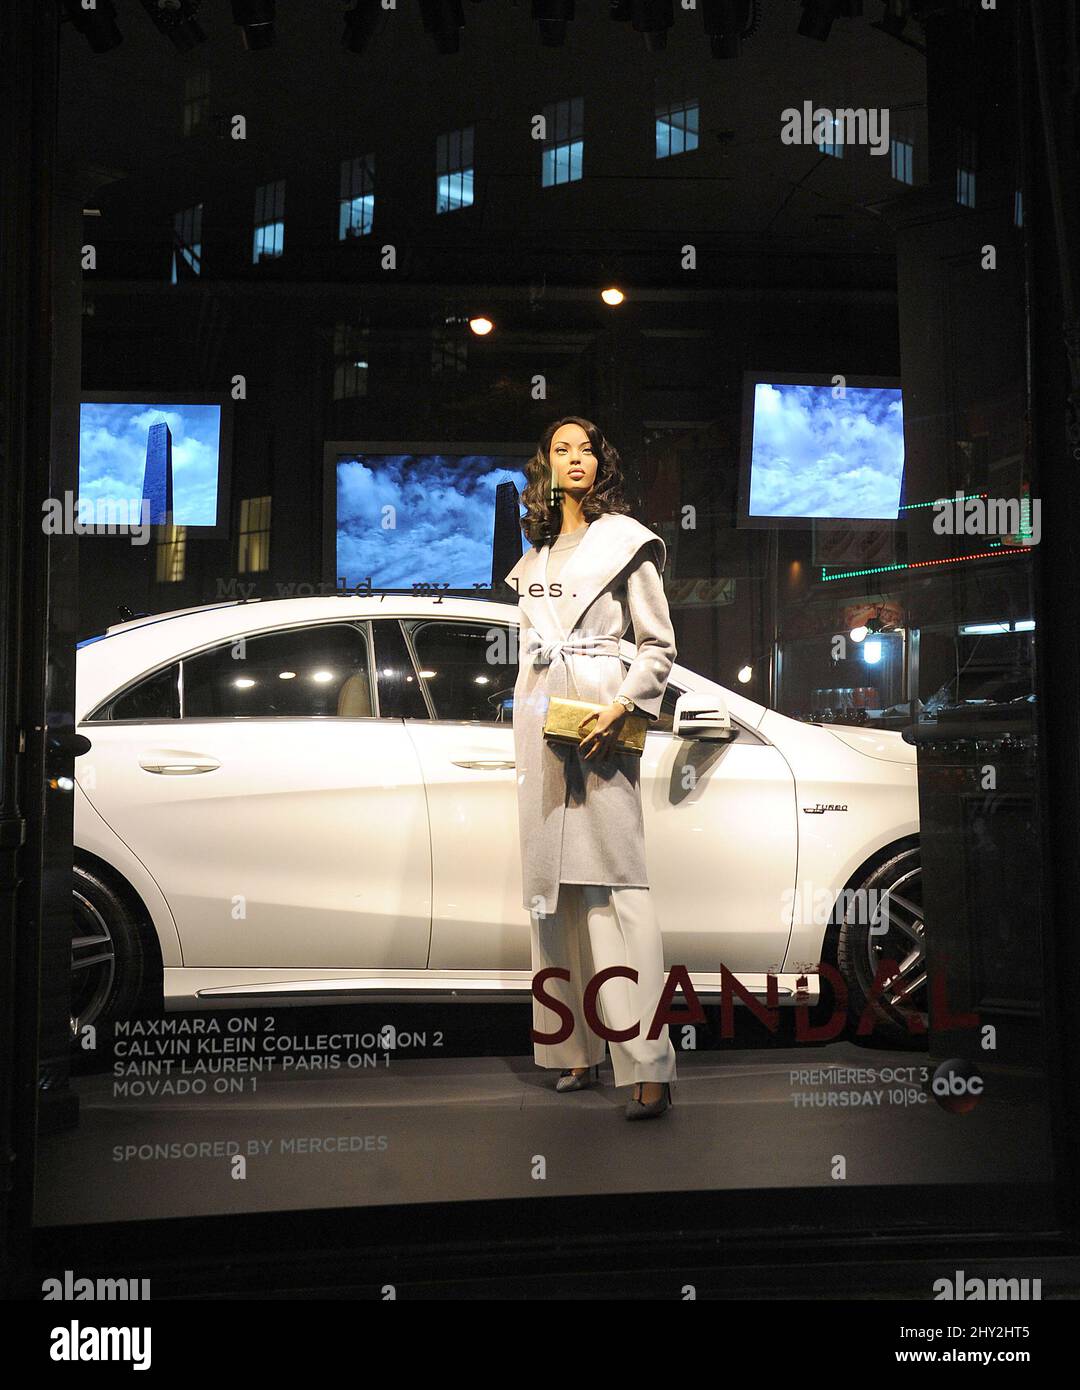 A general view of the 'Scandal' window display at Saks Fifth Avenue in New York. Stock Photo